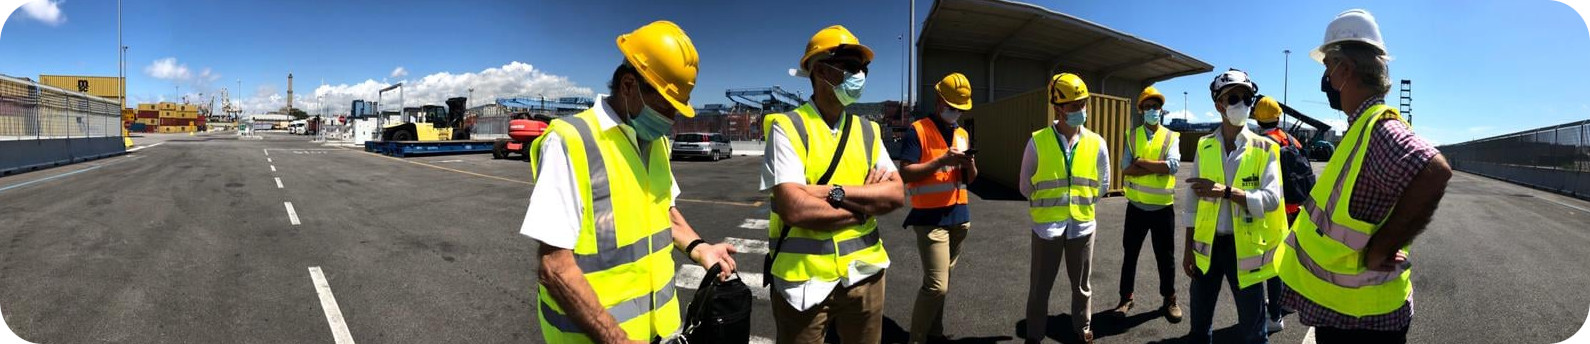 Tour in Terminals with Expert of Safety for Alacres2